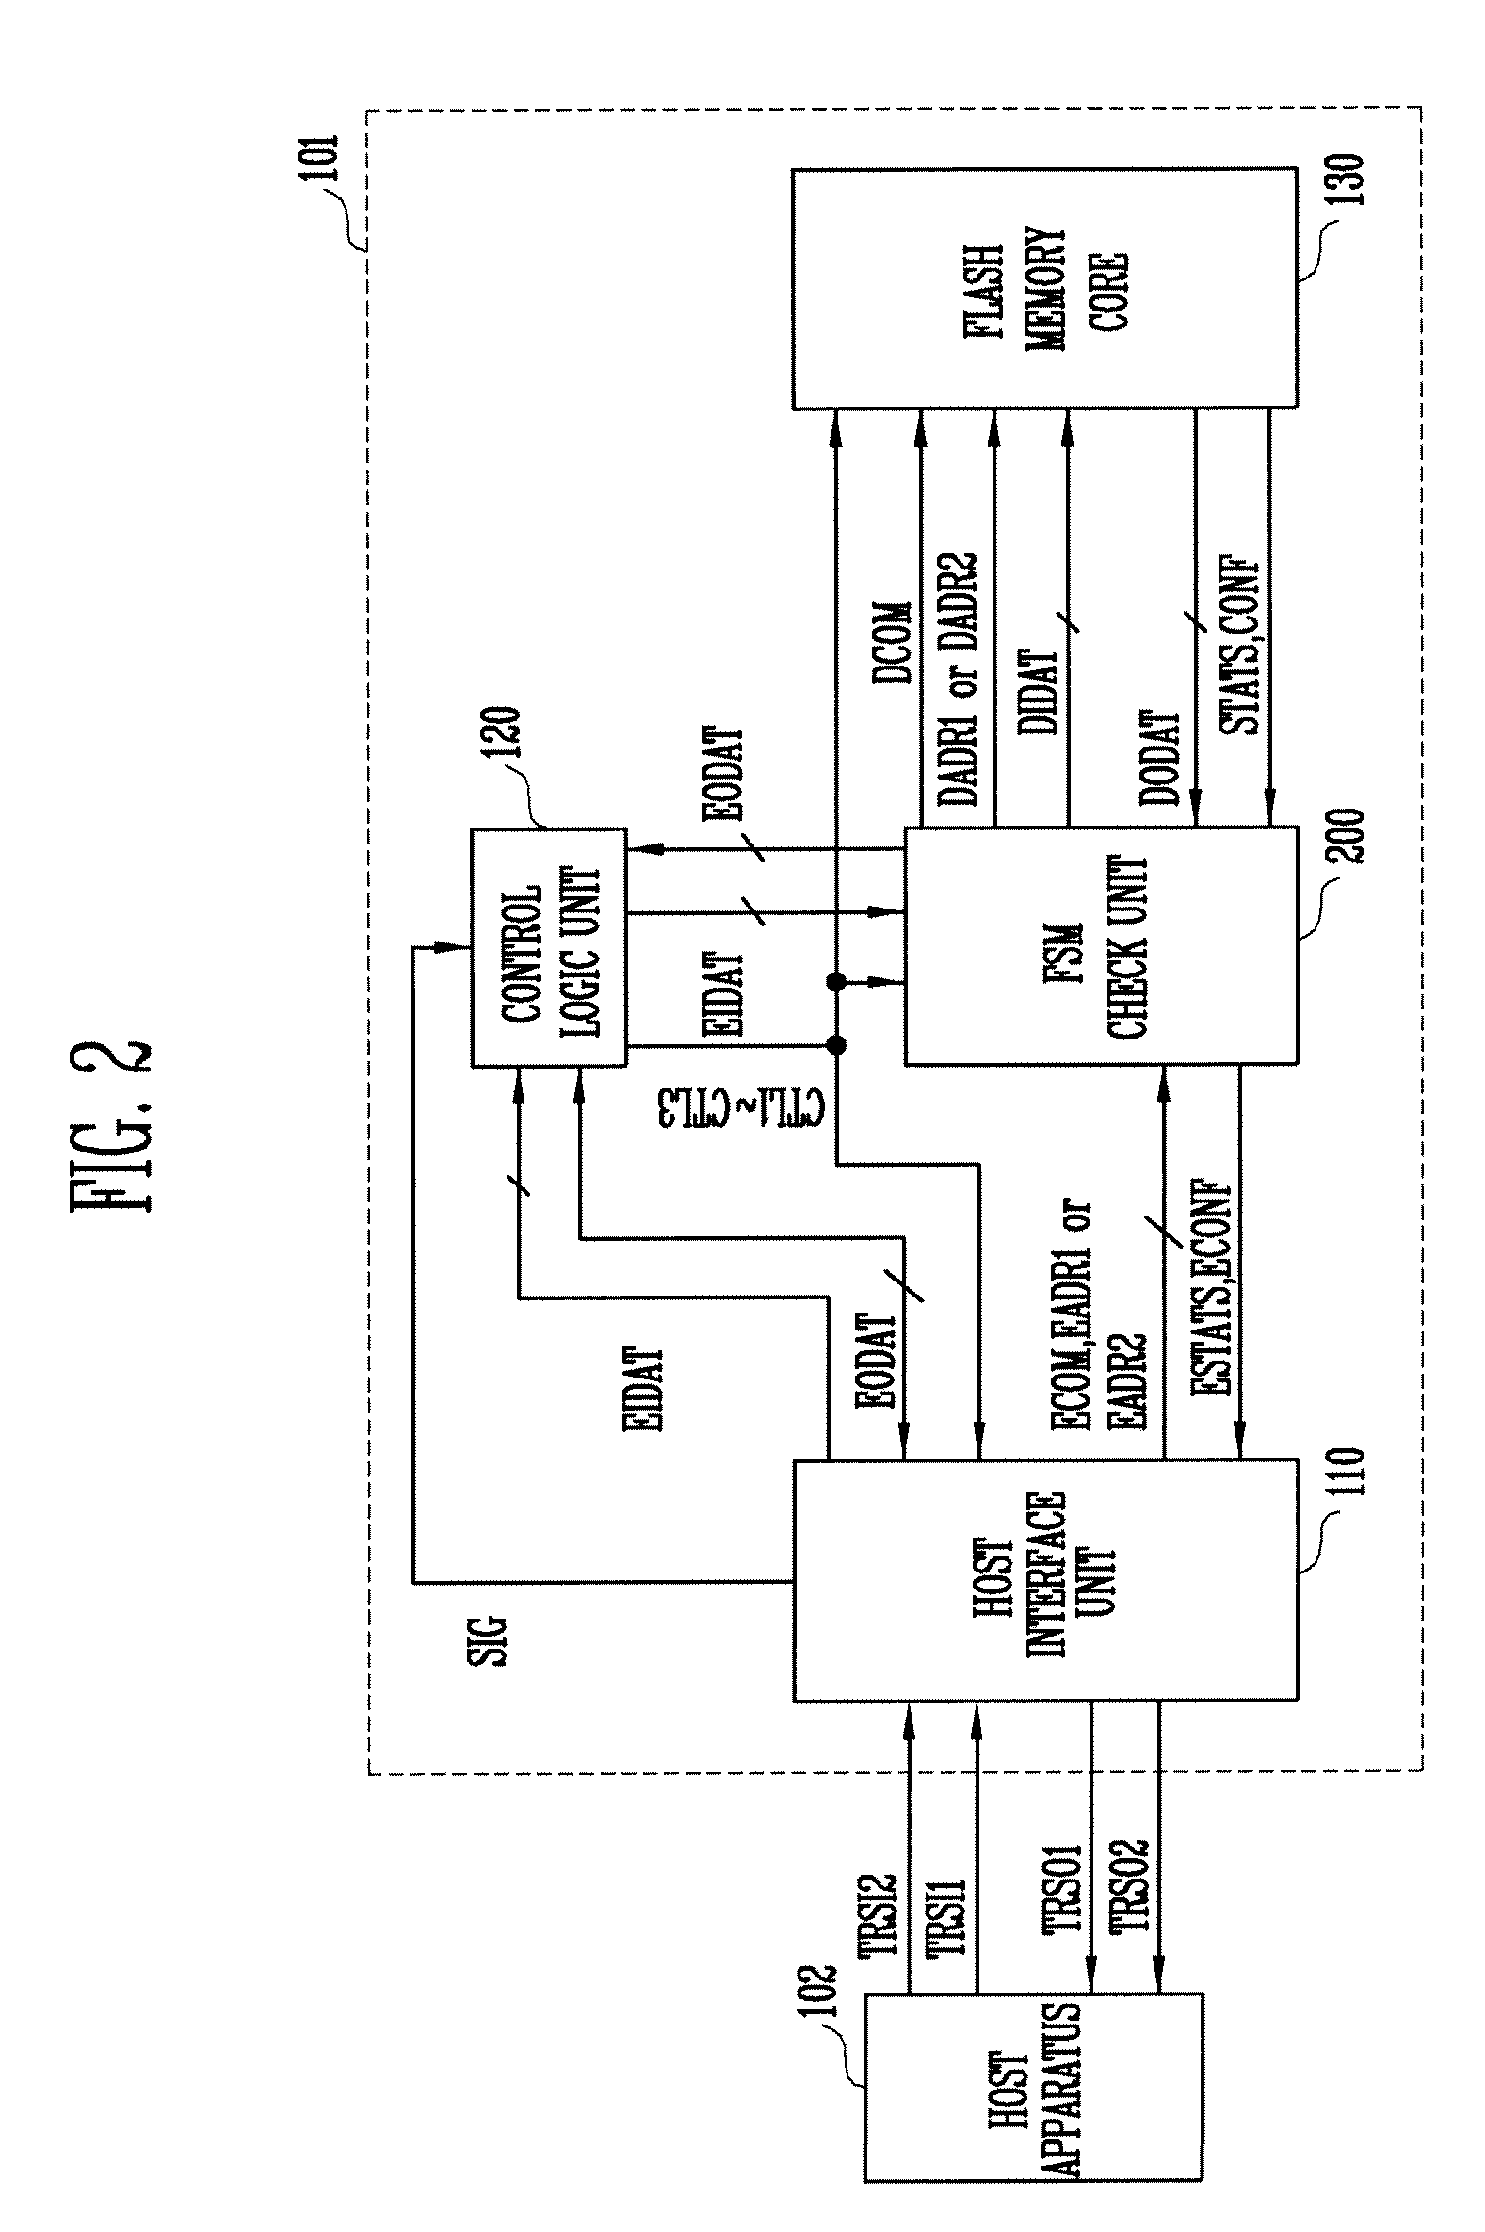 Flash memory device with reduced access time